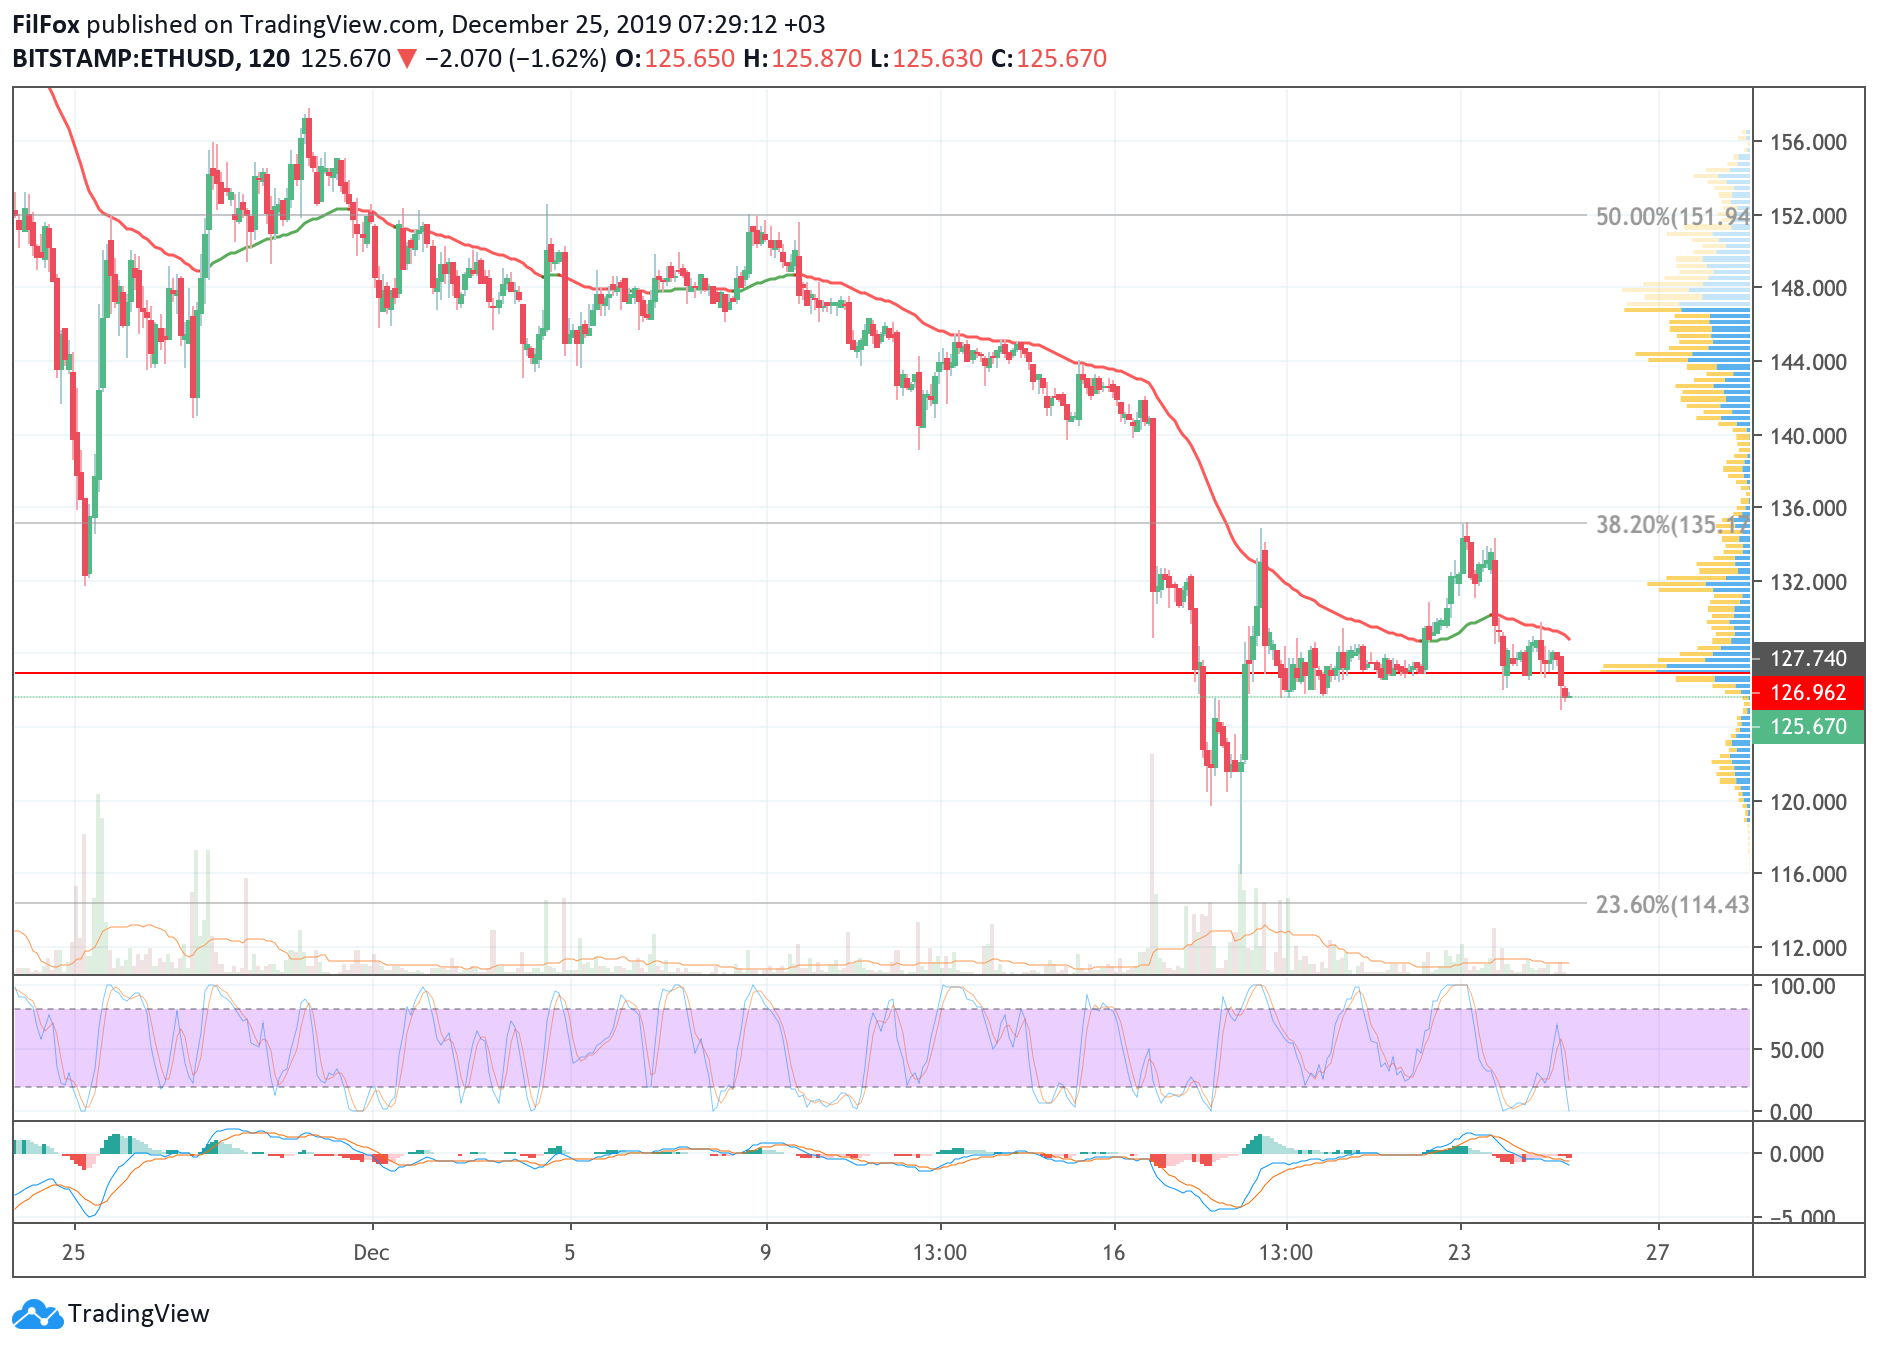 Analysis of cryptocurrency pairs BTC / USD, ETH / USD and XRP / USD as of December 25, 2019